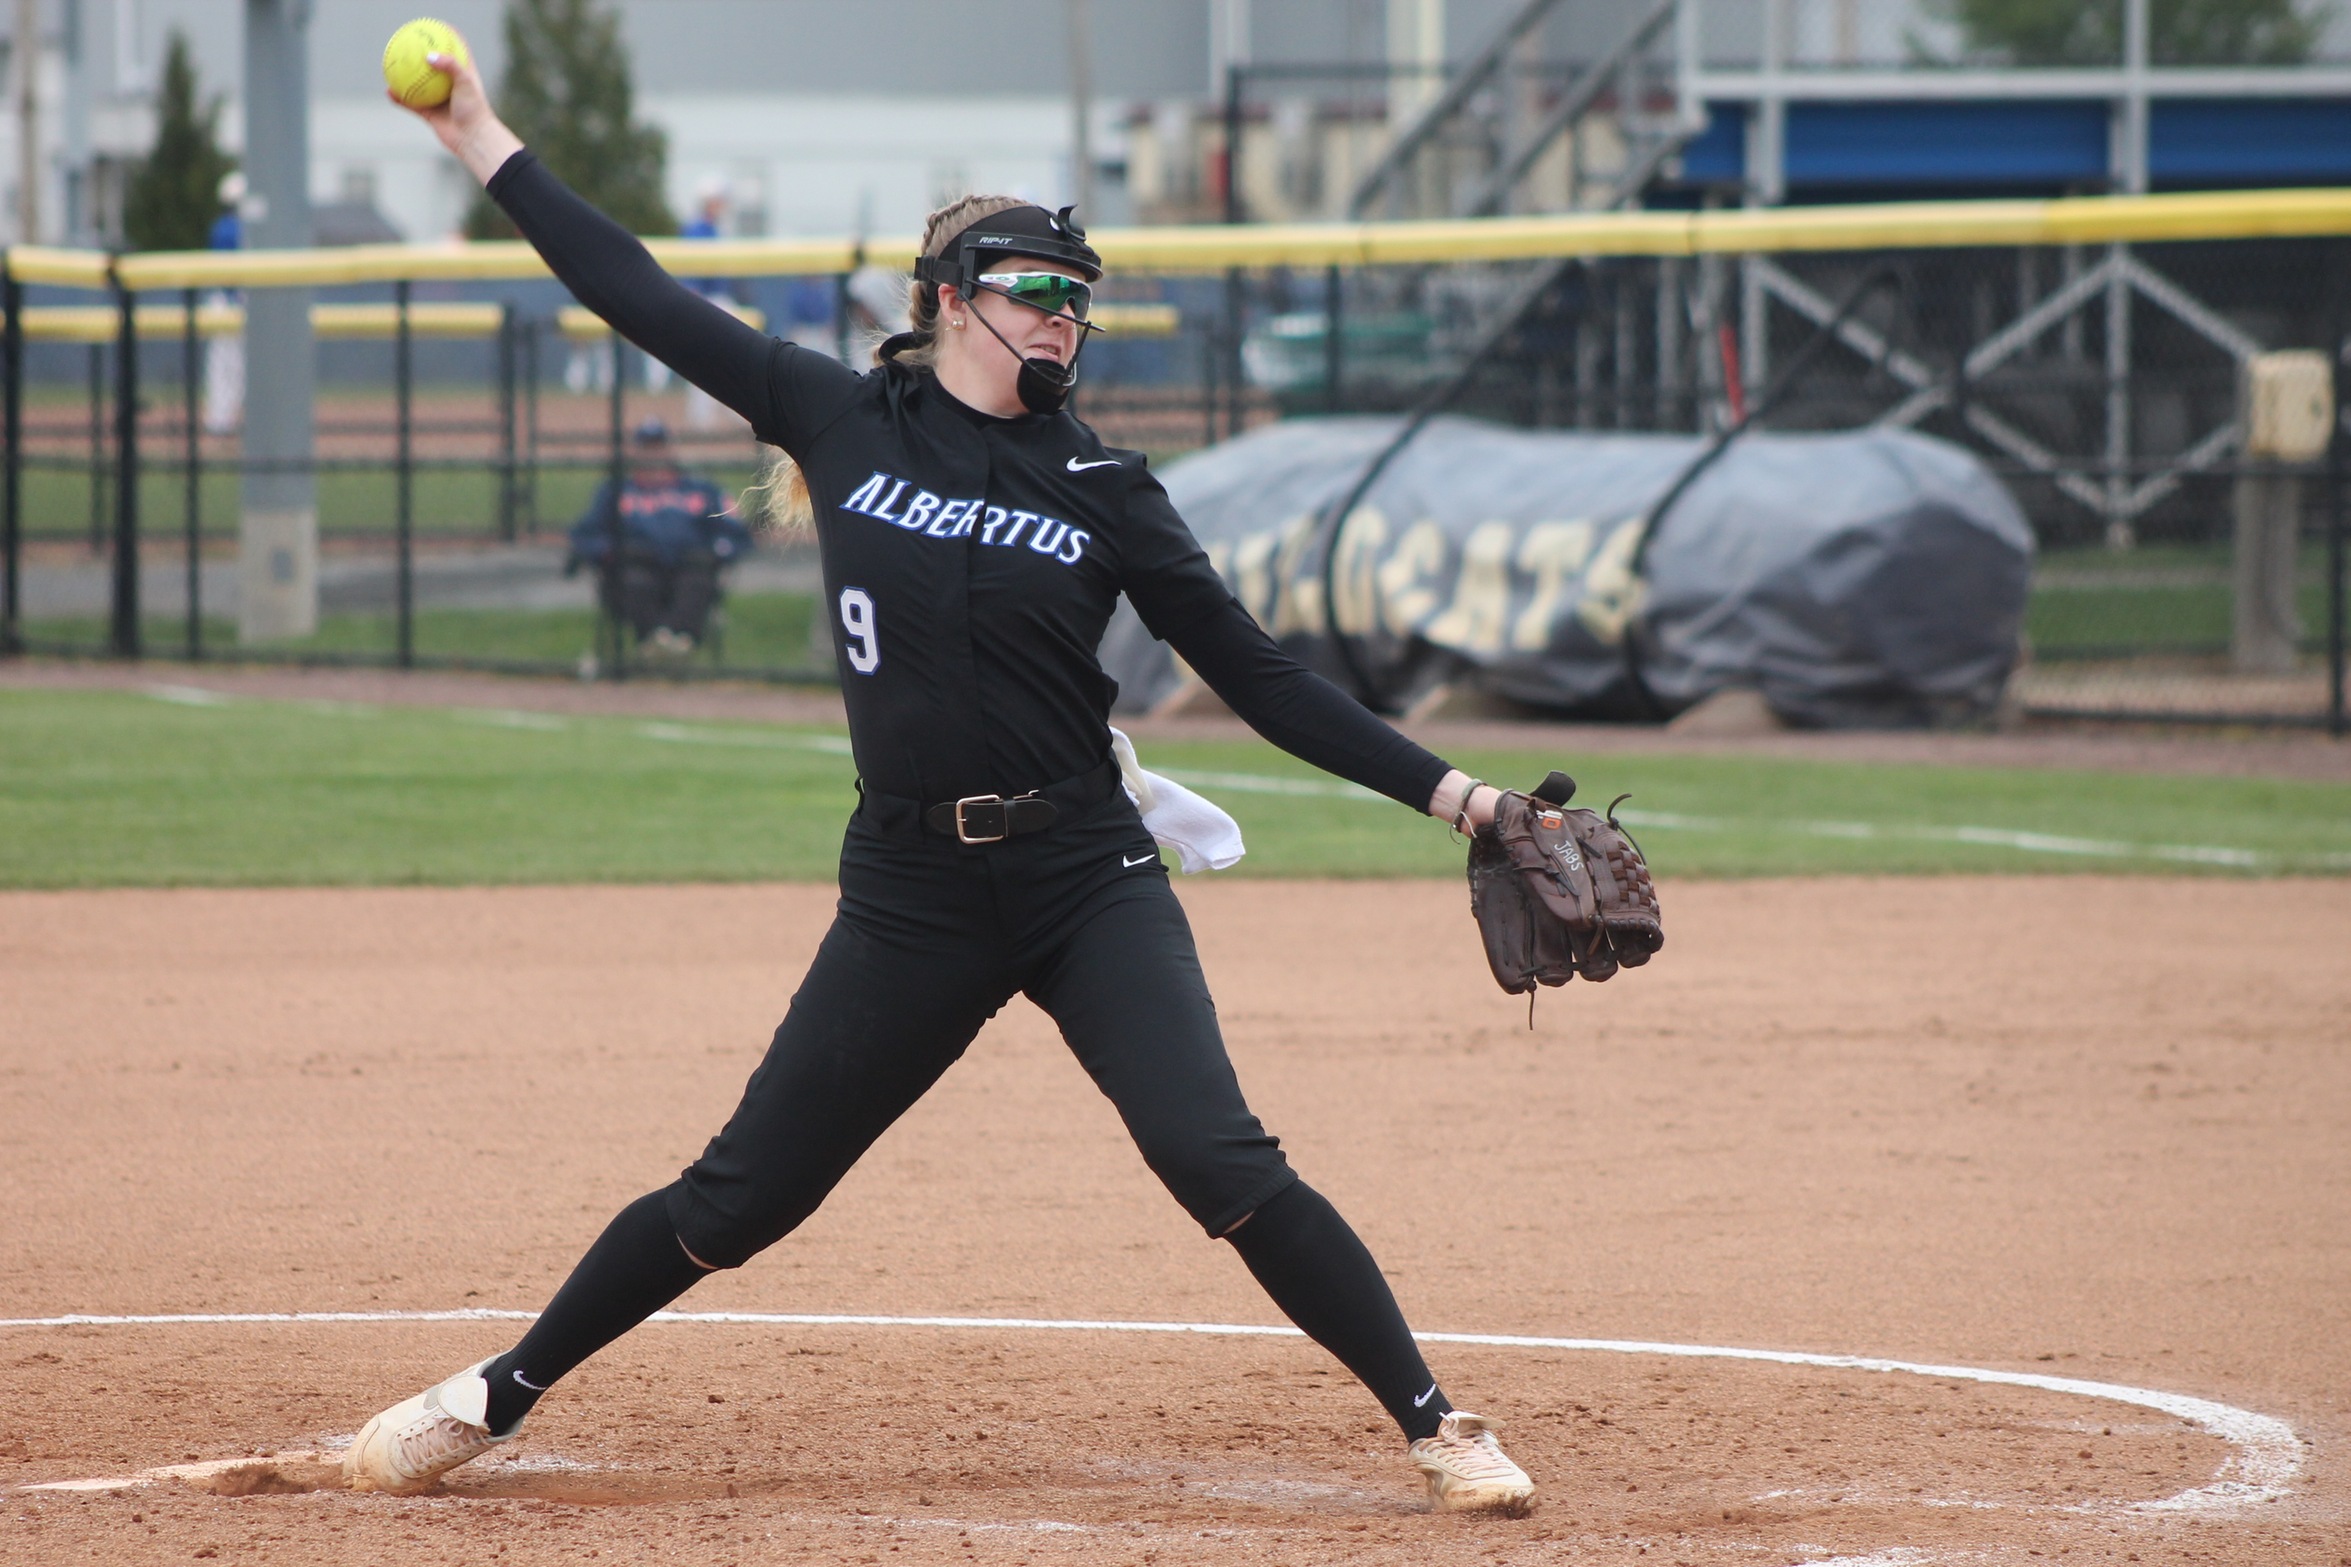 Softball Splits Doubleheader with MSOE and UWP, Jabs Pitches Complete Game to Shutout Raiders